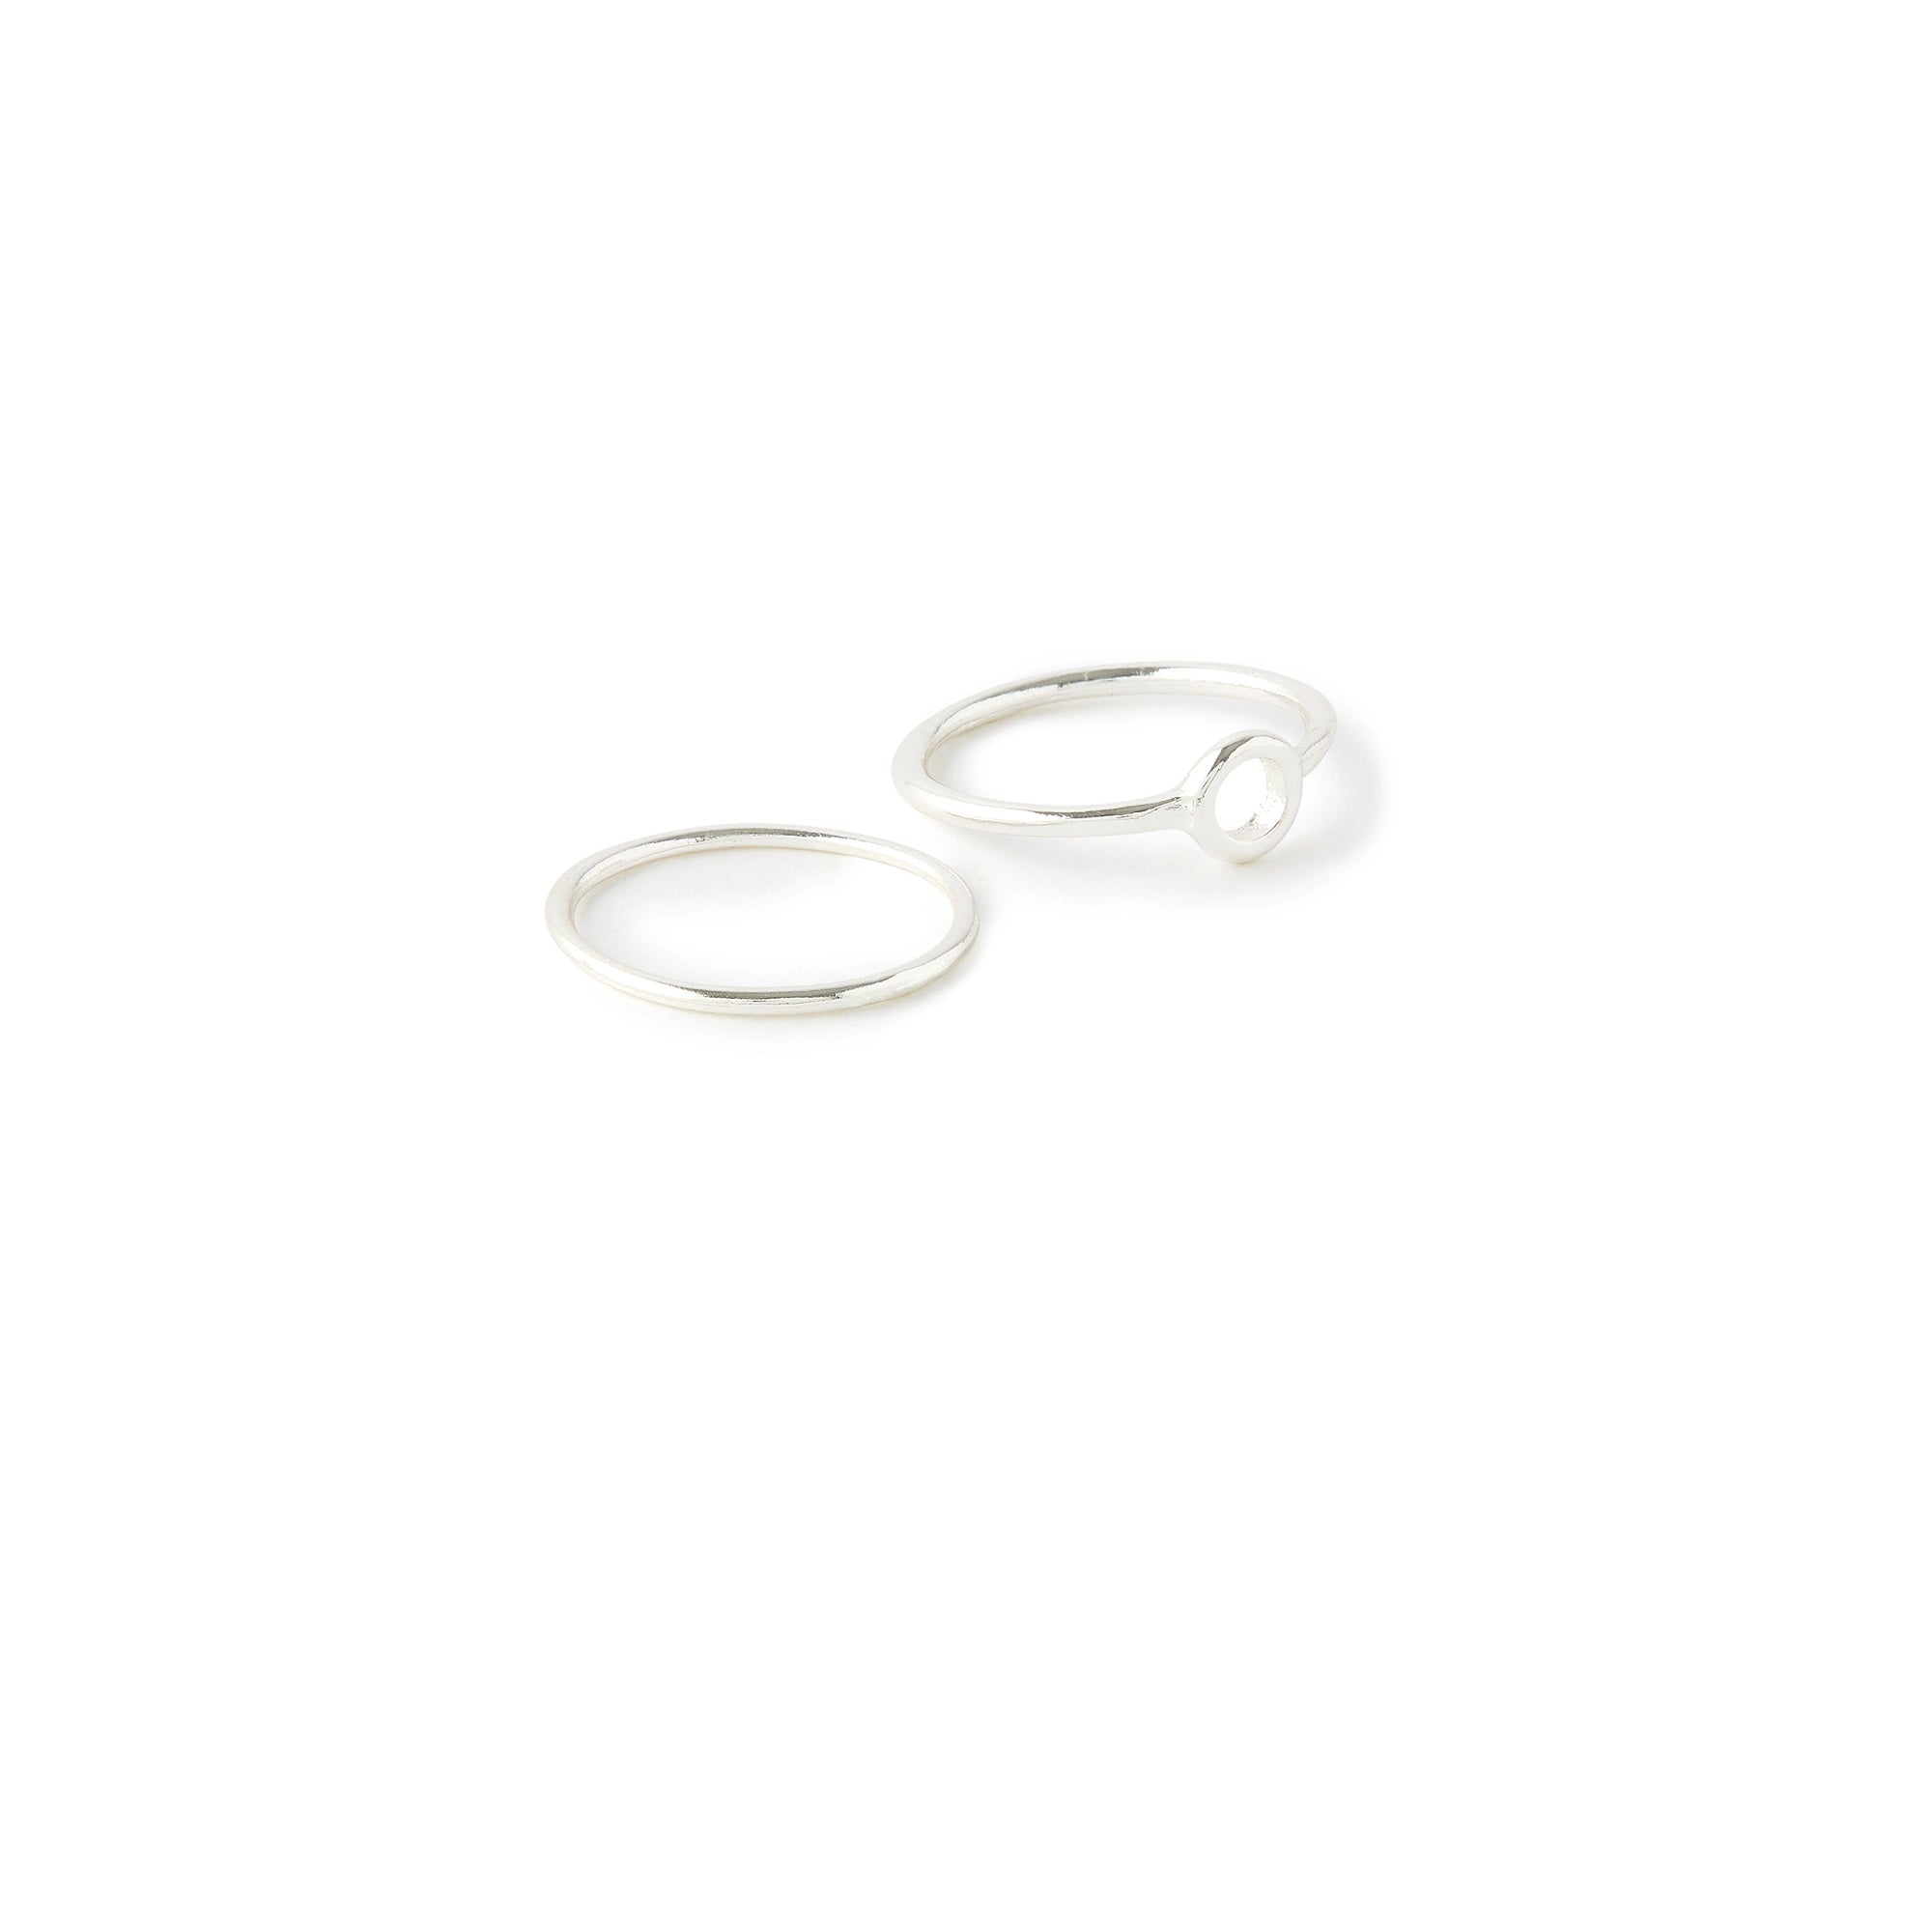 Accessorize London Women's Set Of 2 Cut Out Circle Stacking Rings Medium